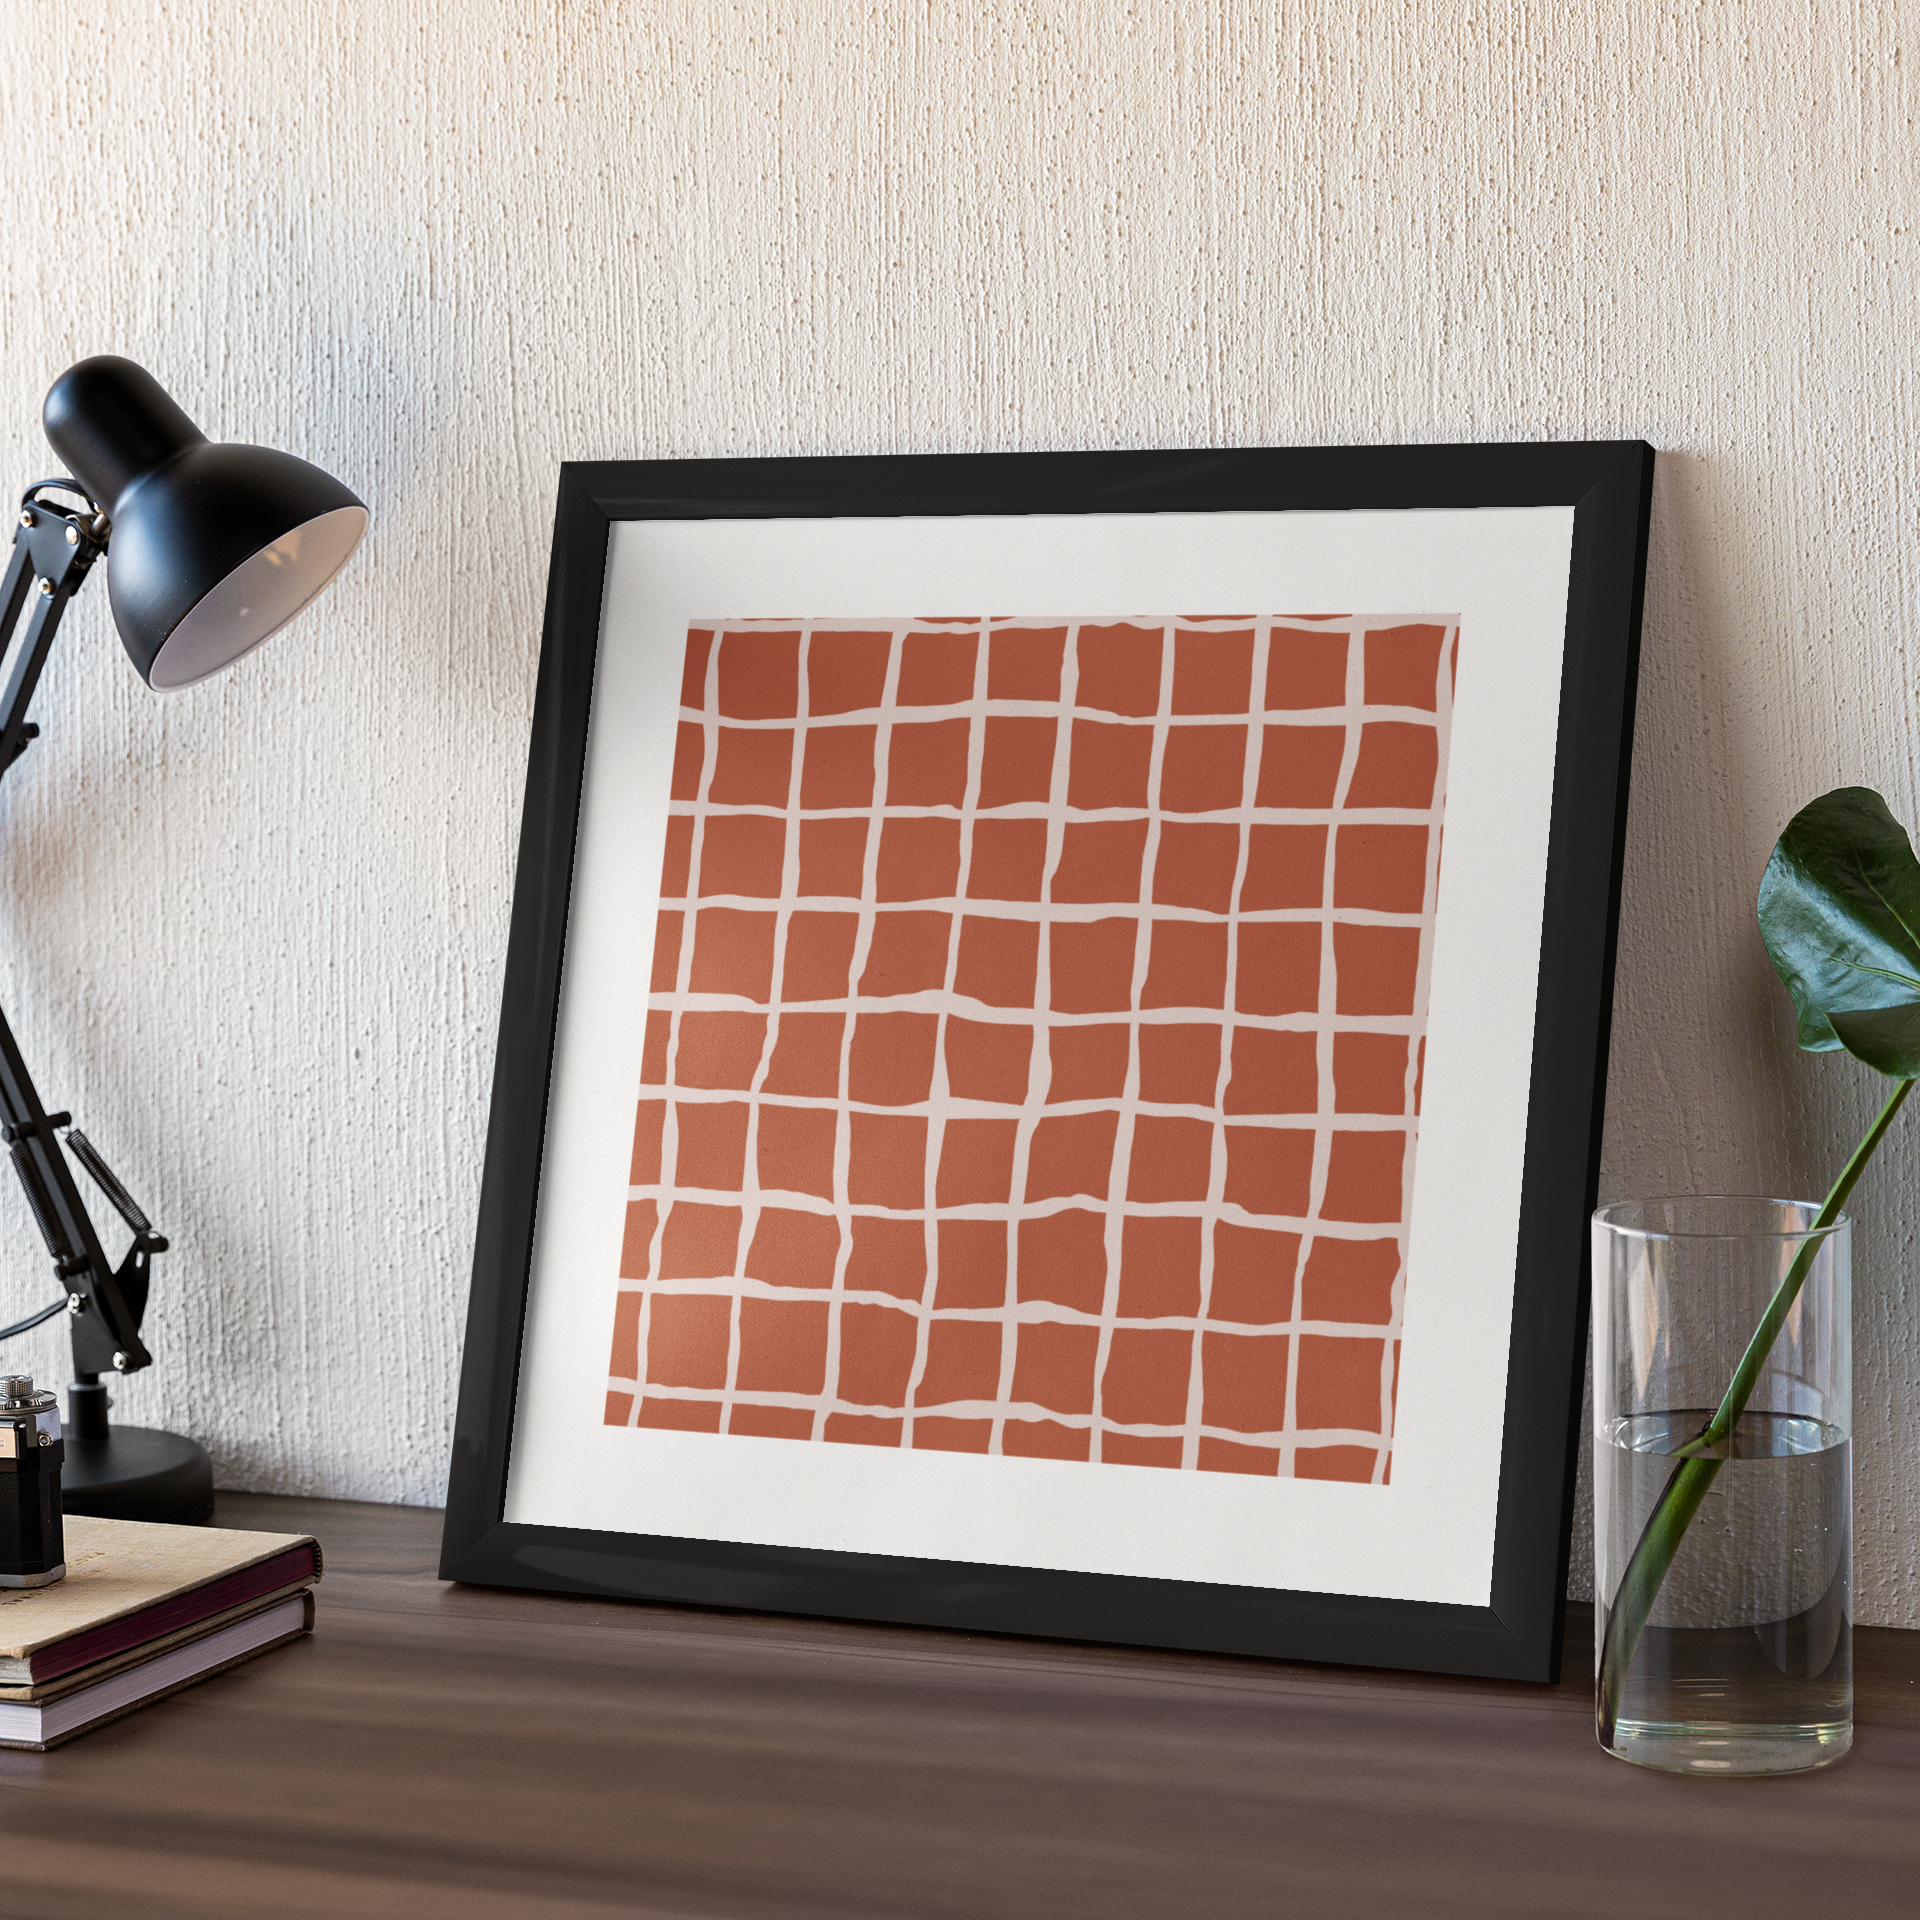 Introducing our stunning square boho-inspired art print, designed to make a statement in any space. Featuring a relaxed grid pattern on a warm and inviting terracotta background, this piece adds bohemian charm to your home decor.